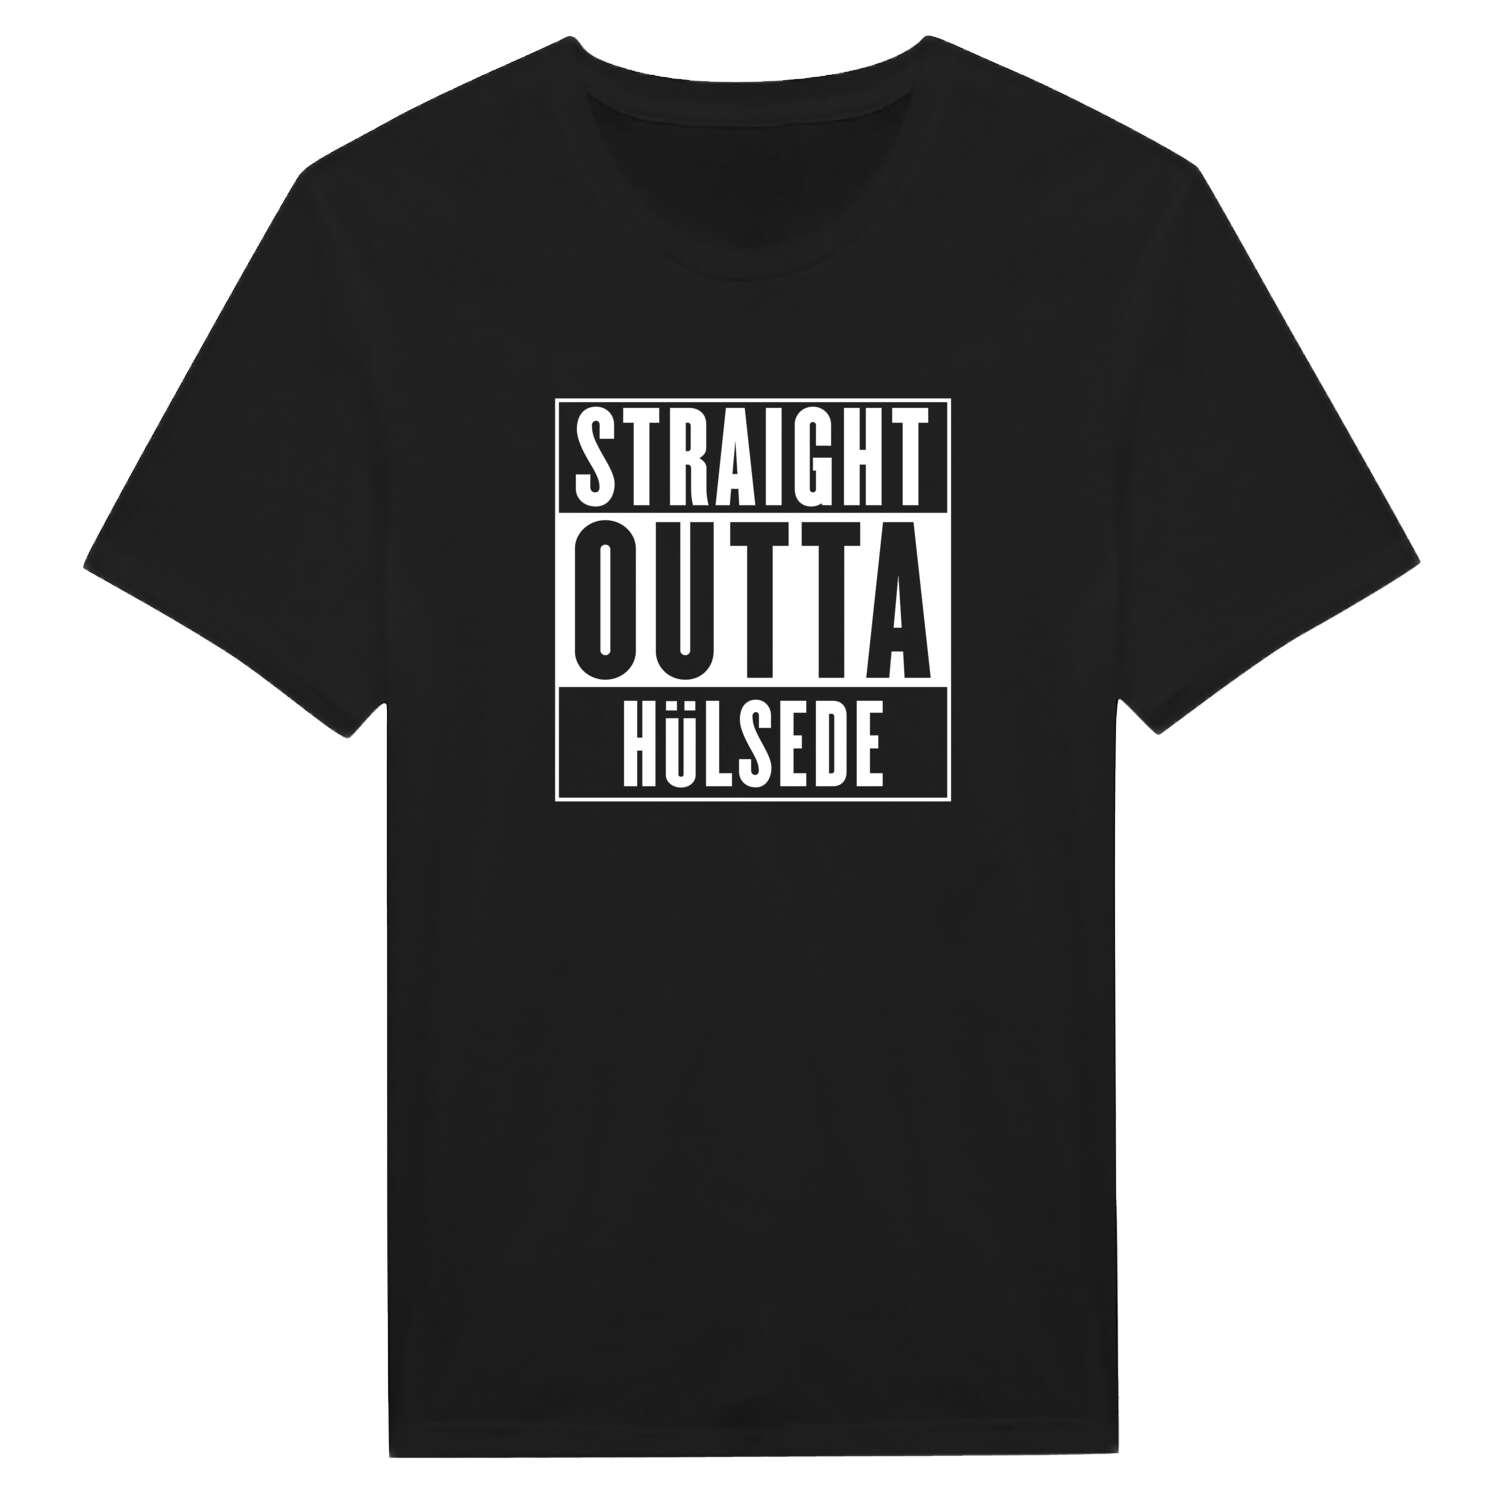 Hülsede T-Shirt »Straight Outta«